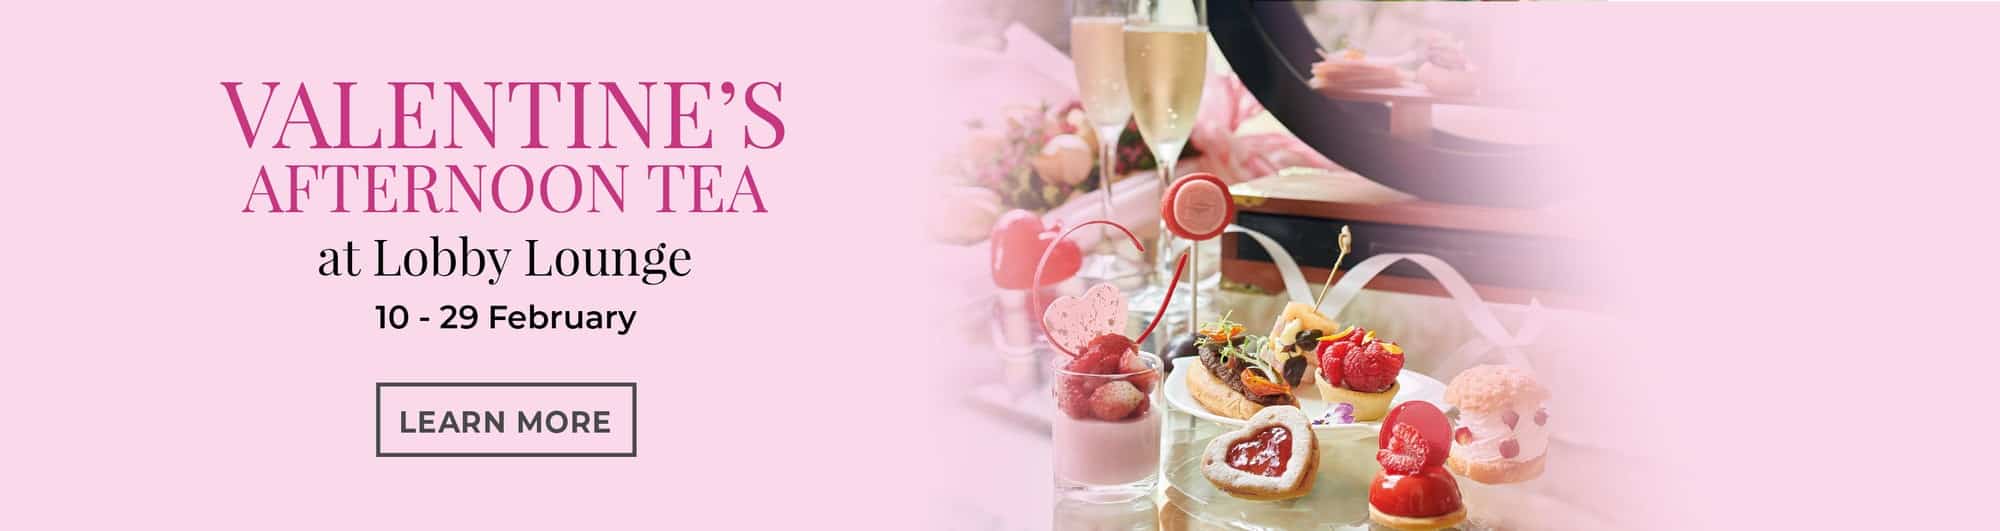 Valentine’s Afternoon Tea Collection at Lobby Lounge